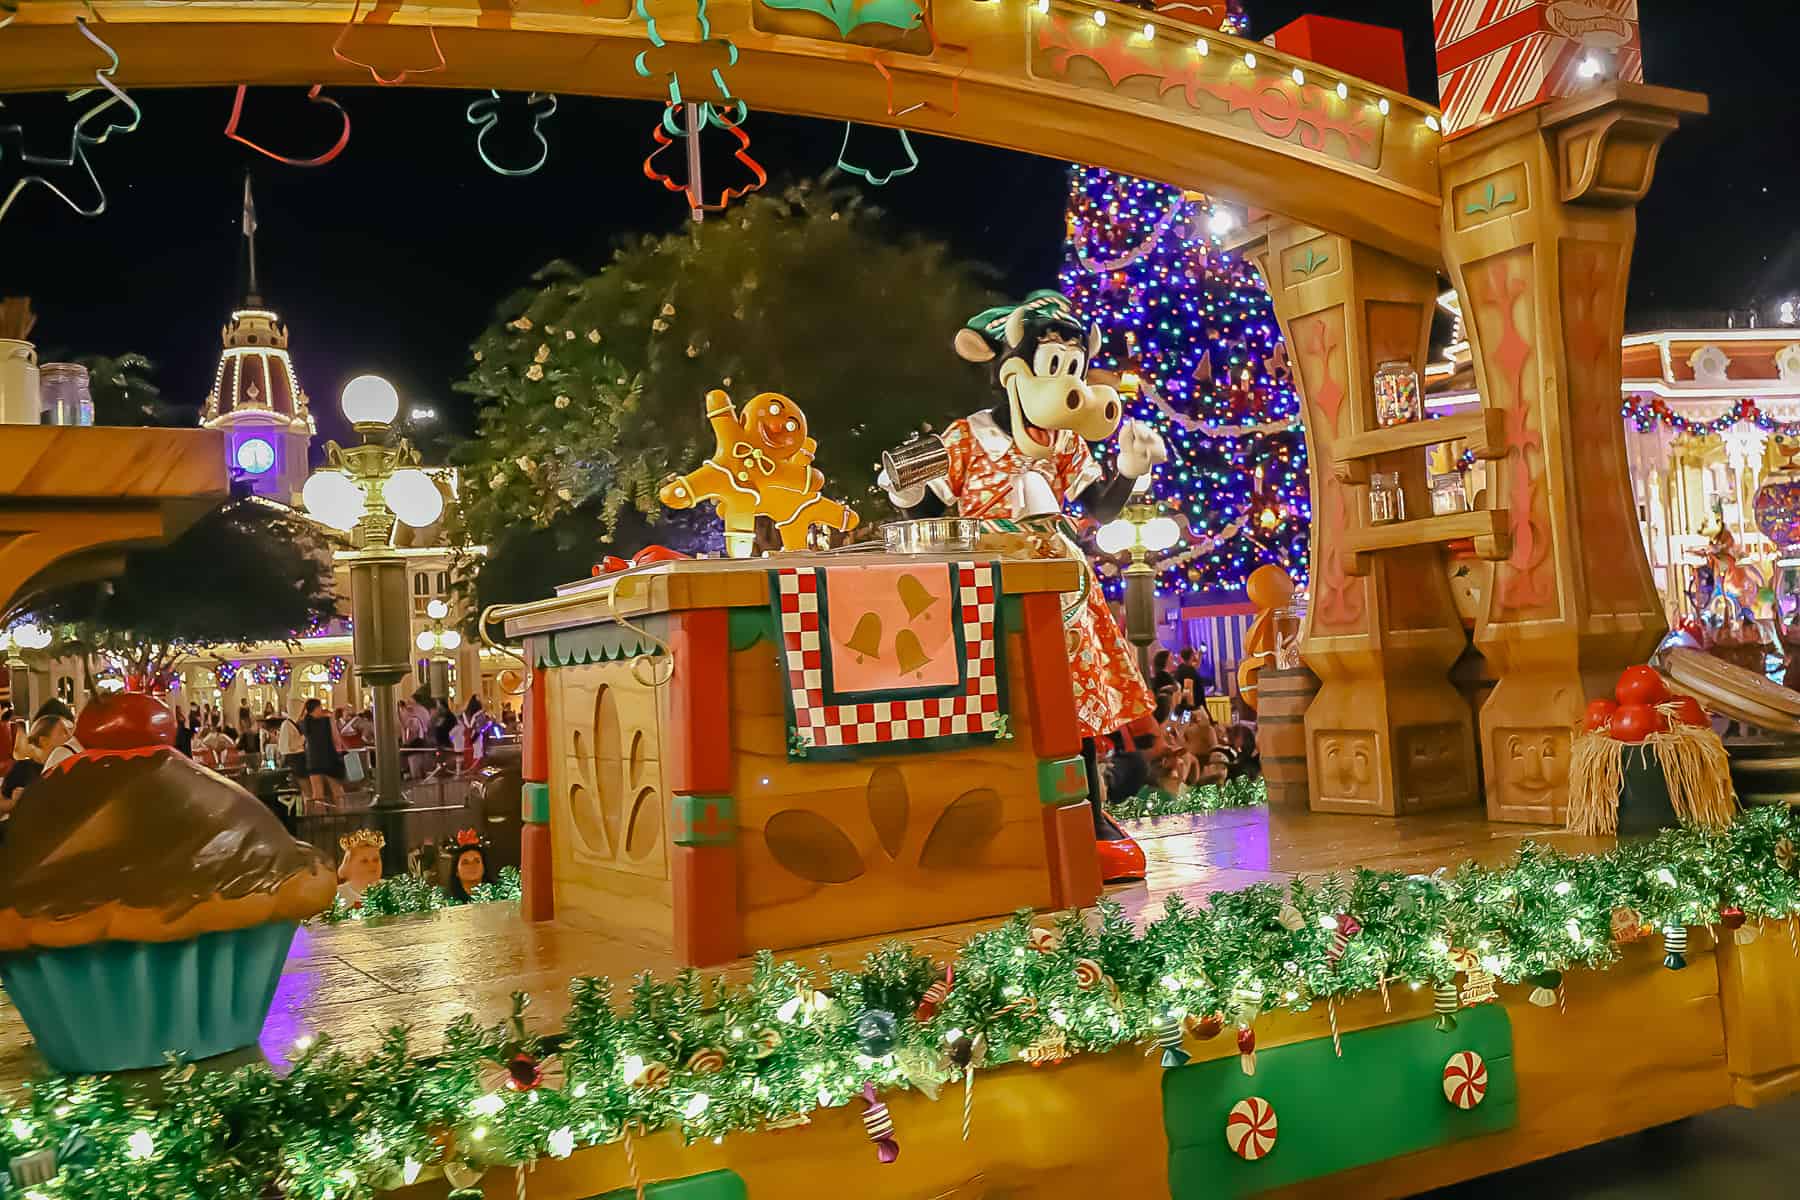 Clarabelle Cow in the evening Christmas Parade. 